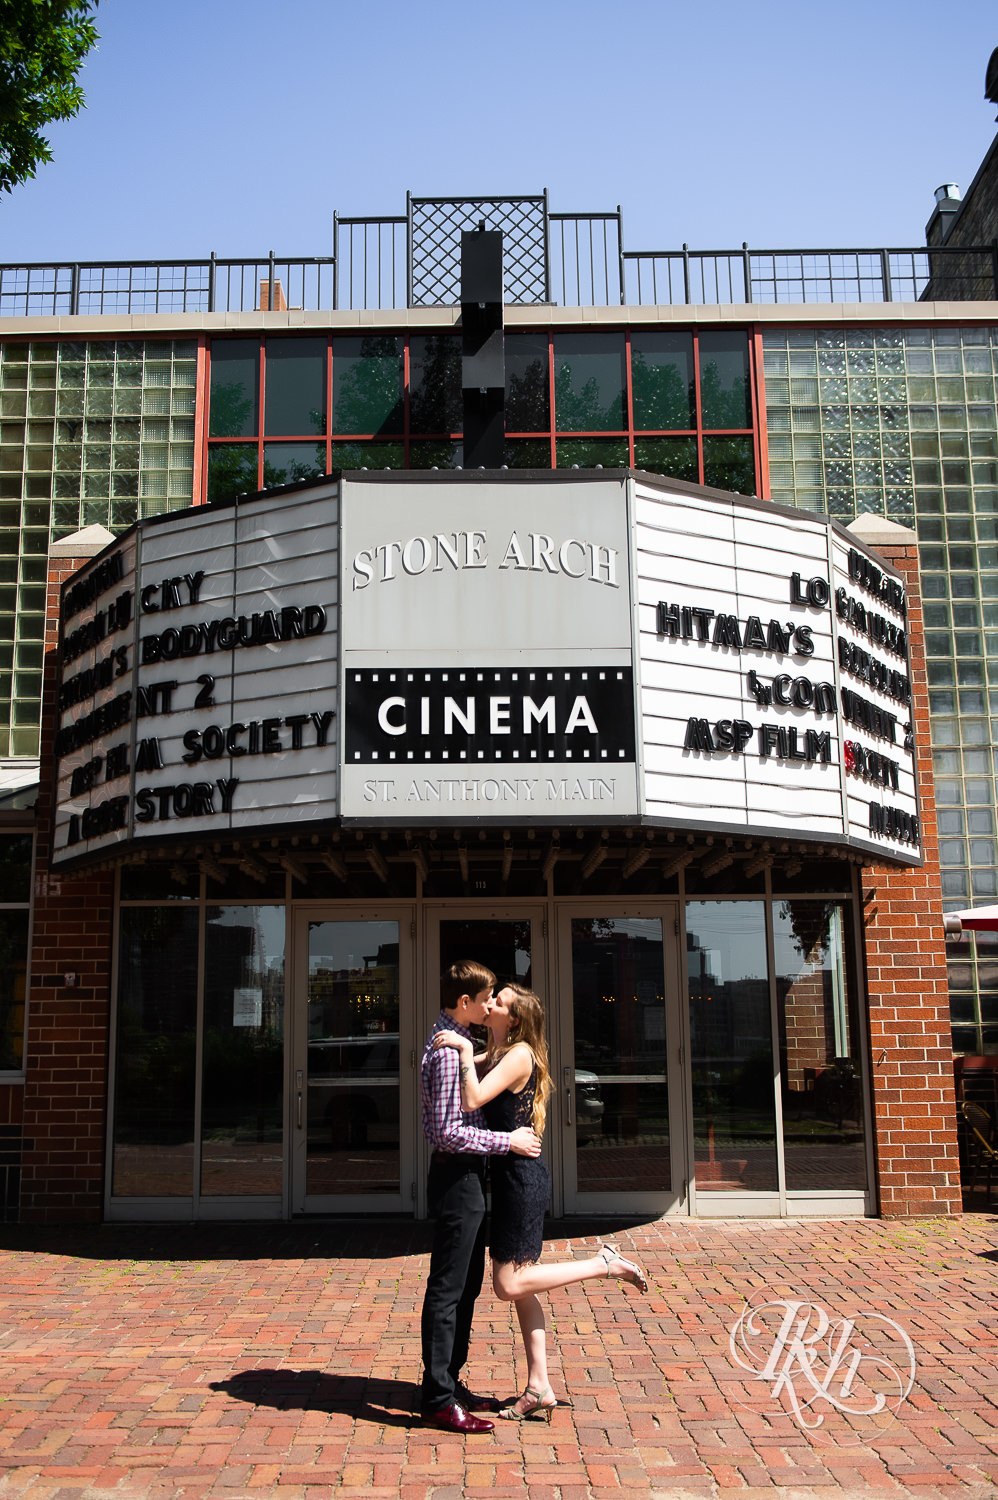 Man and woman in black lace dress kiss in front of Stone Arch Cinema in Saint Anthony Main in Minneapolis, Minnesota.